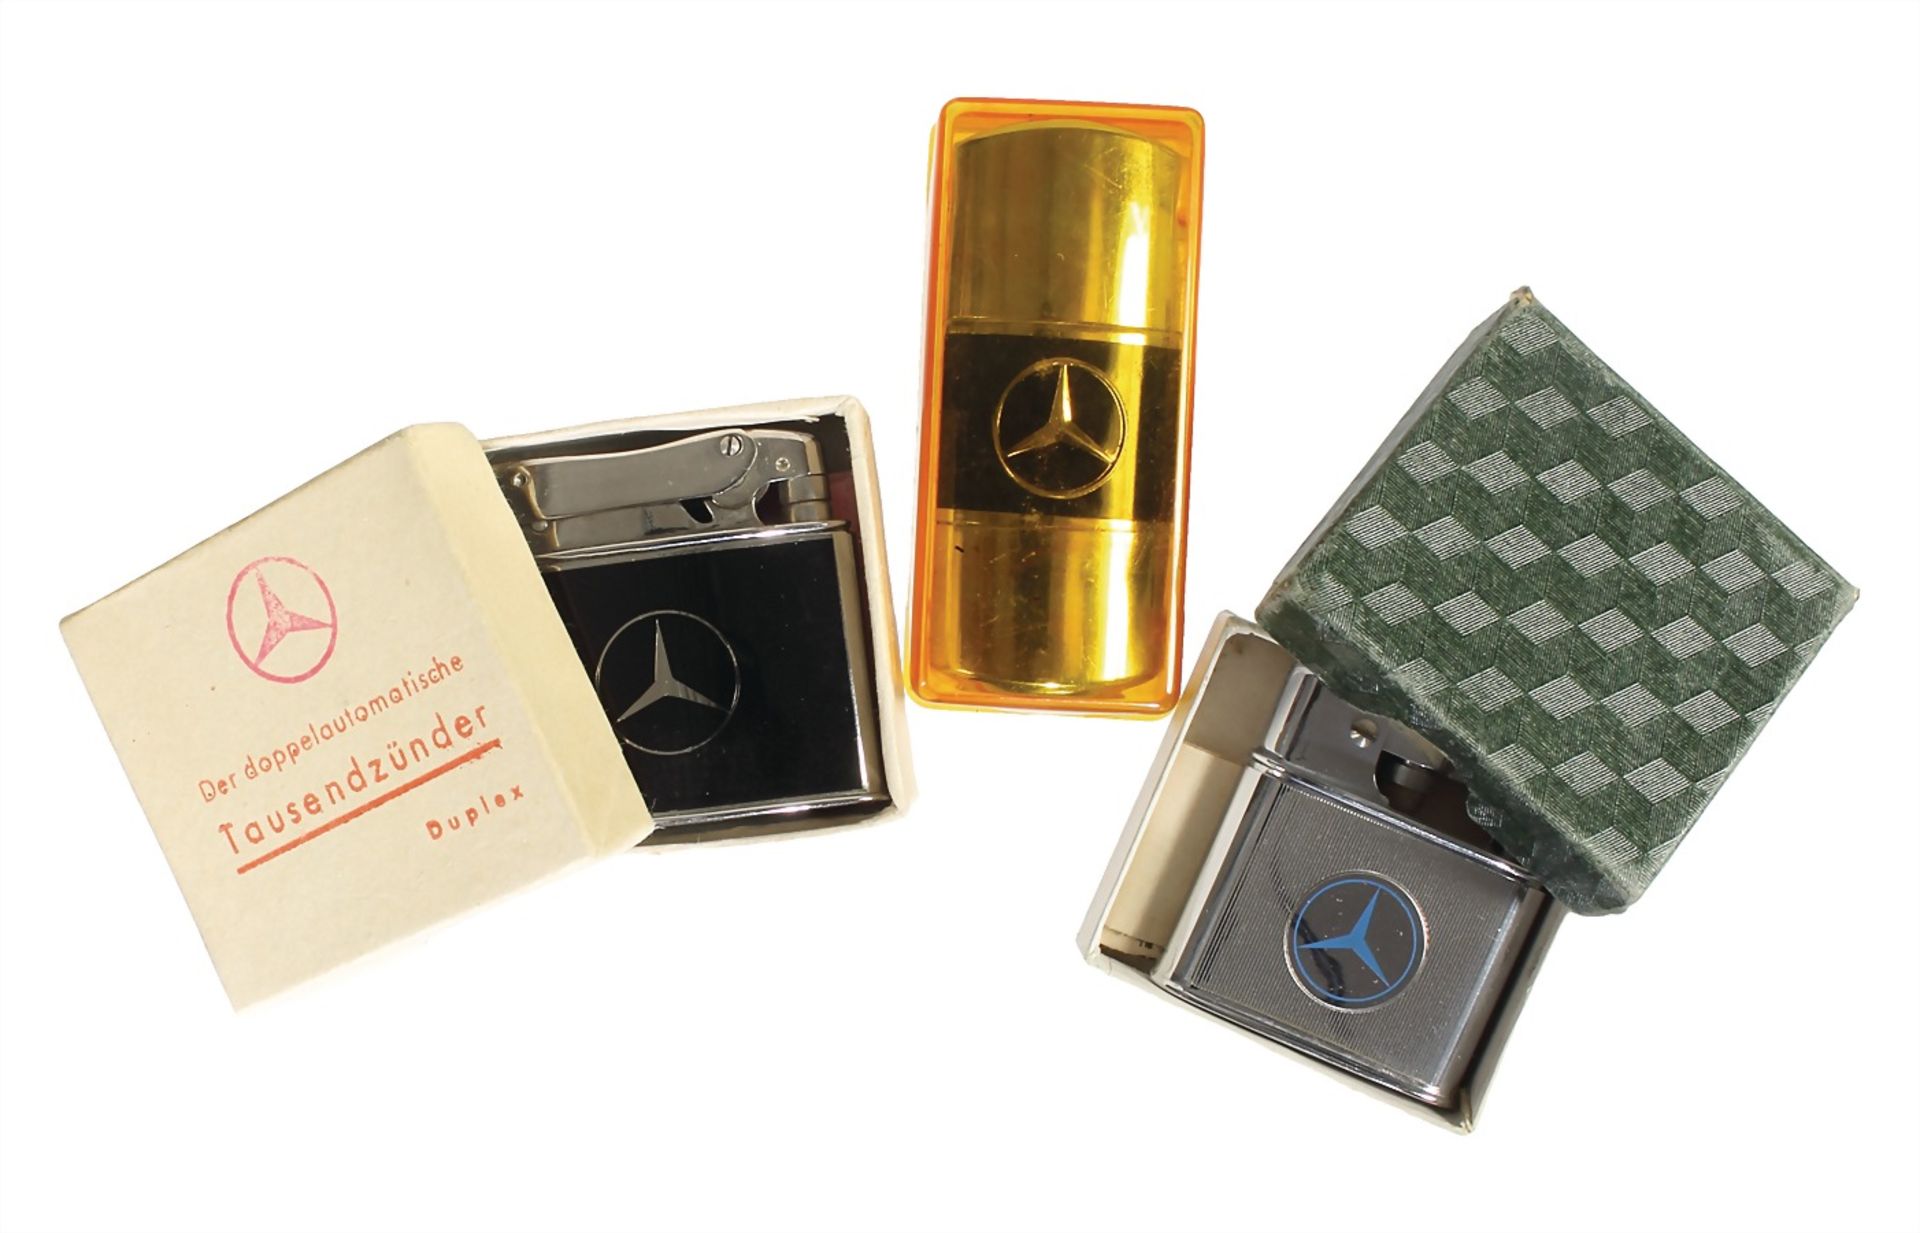 lot: 3 old fuel cigarette lighters by "MERCEDES BENZ" with Mercedes Benz star, among others